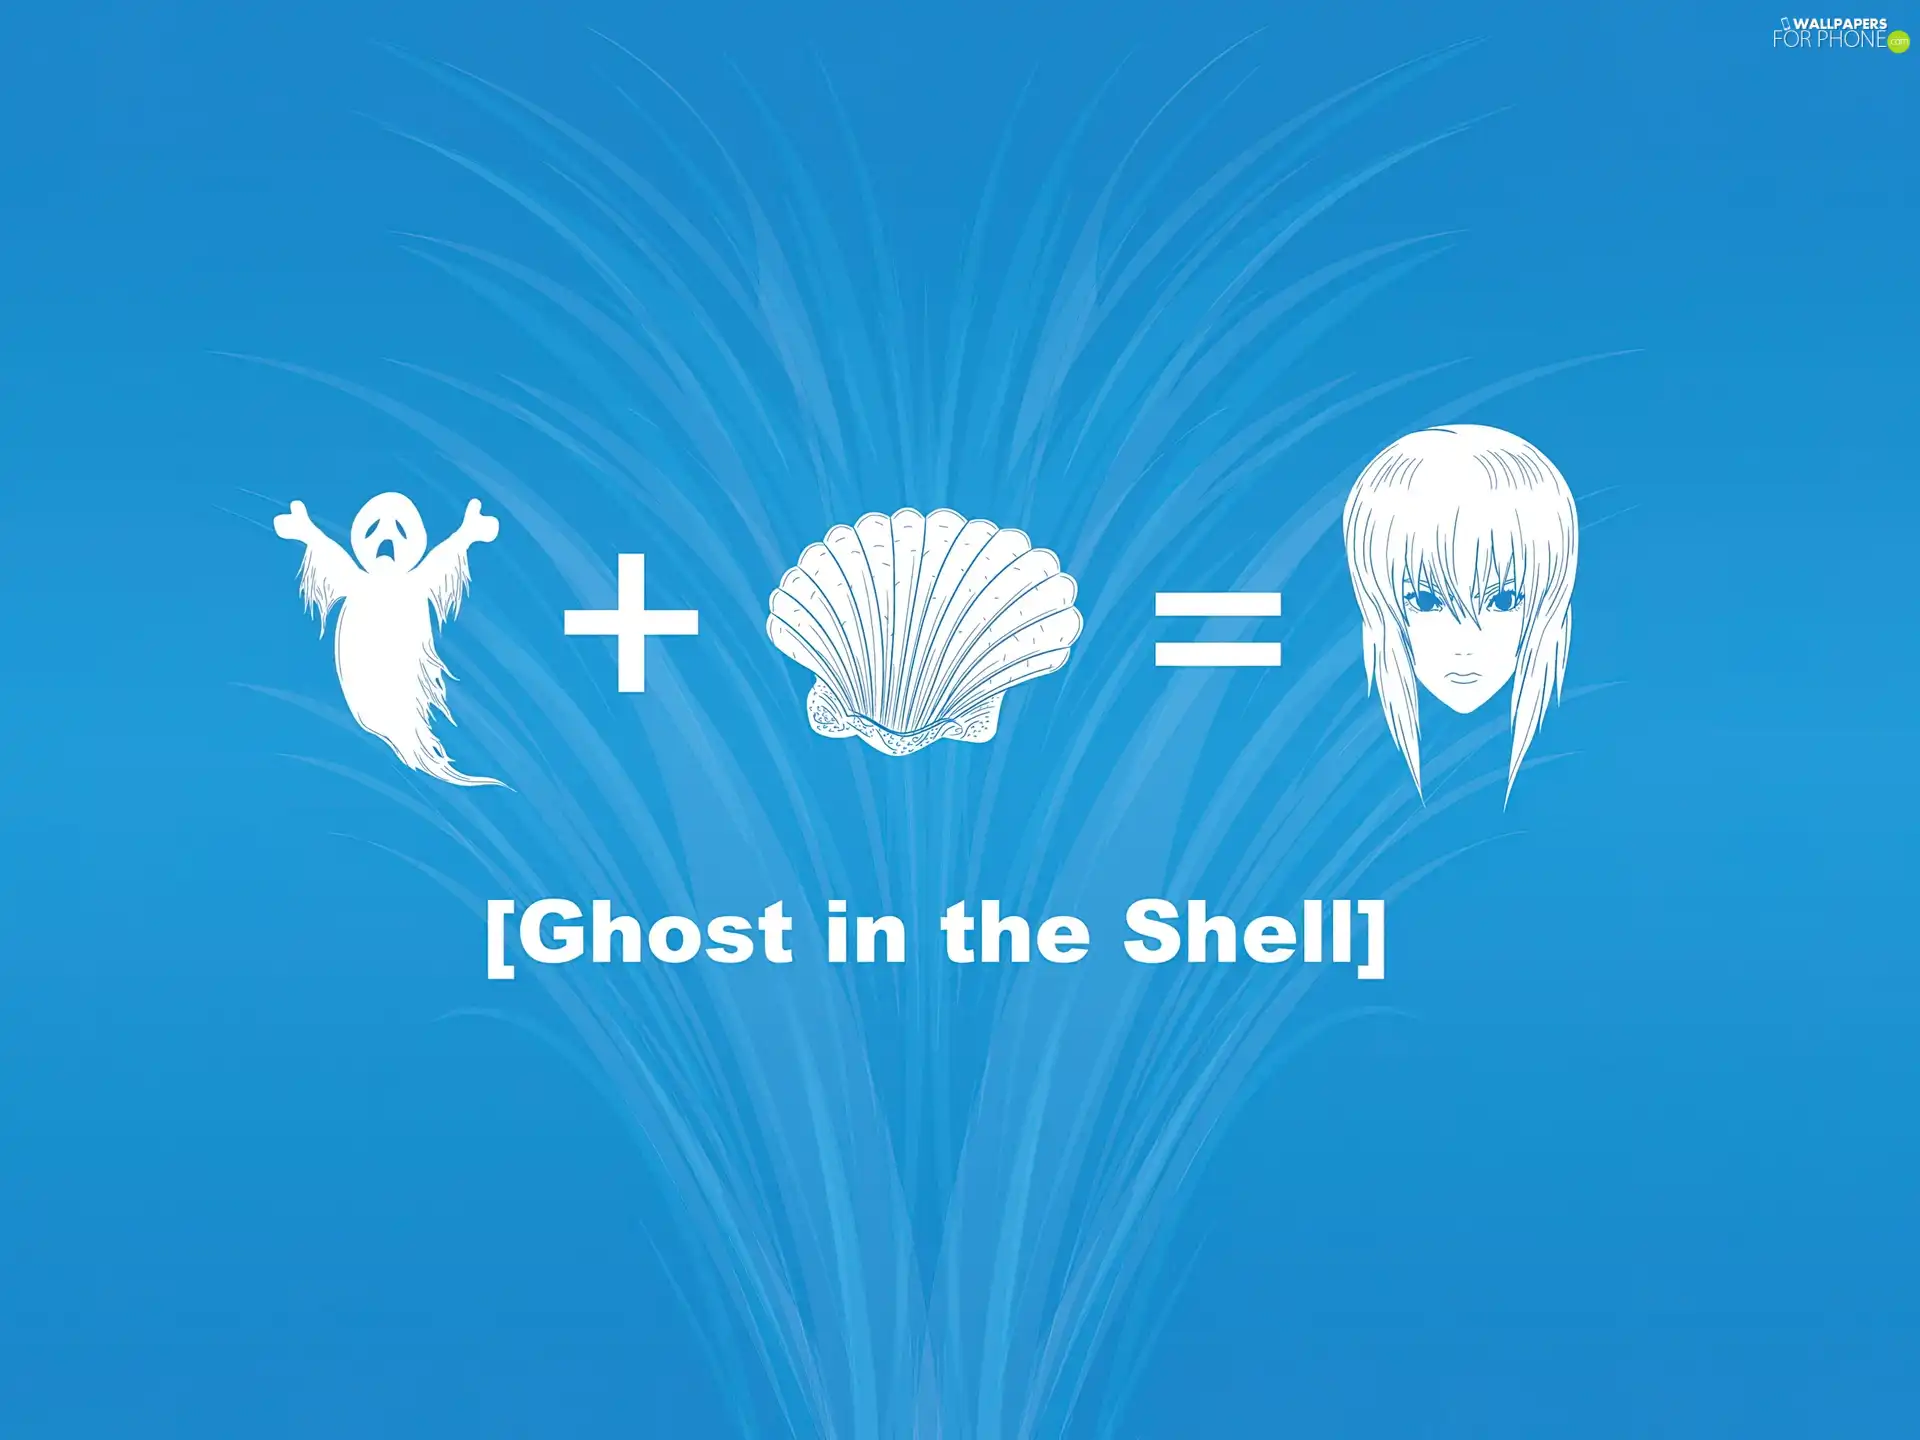 Ghost In The Shell, equation